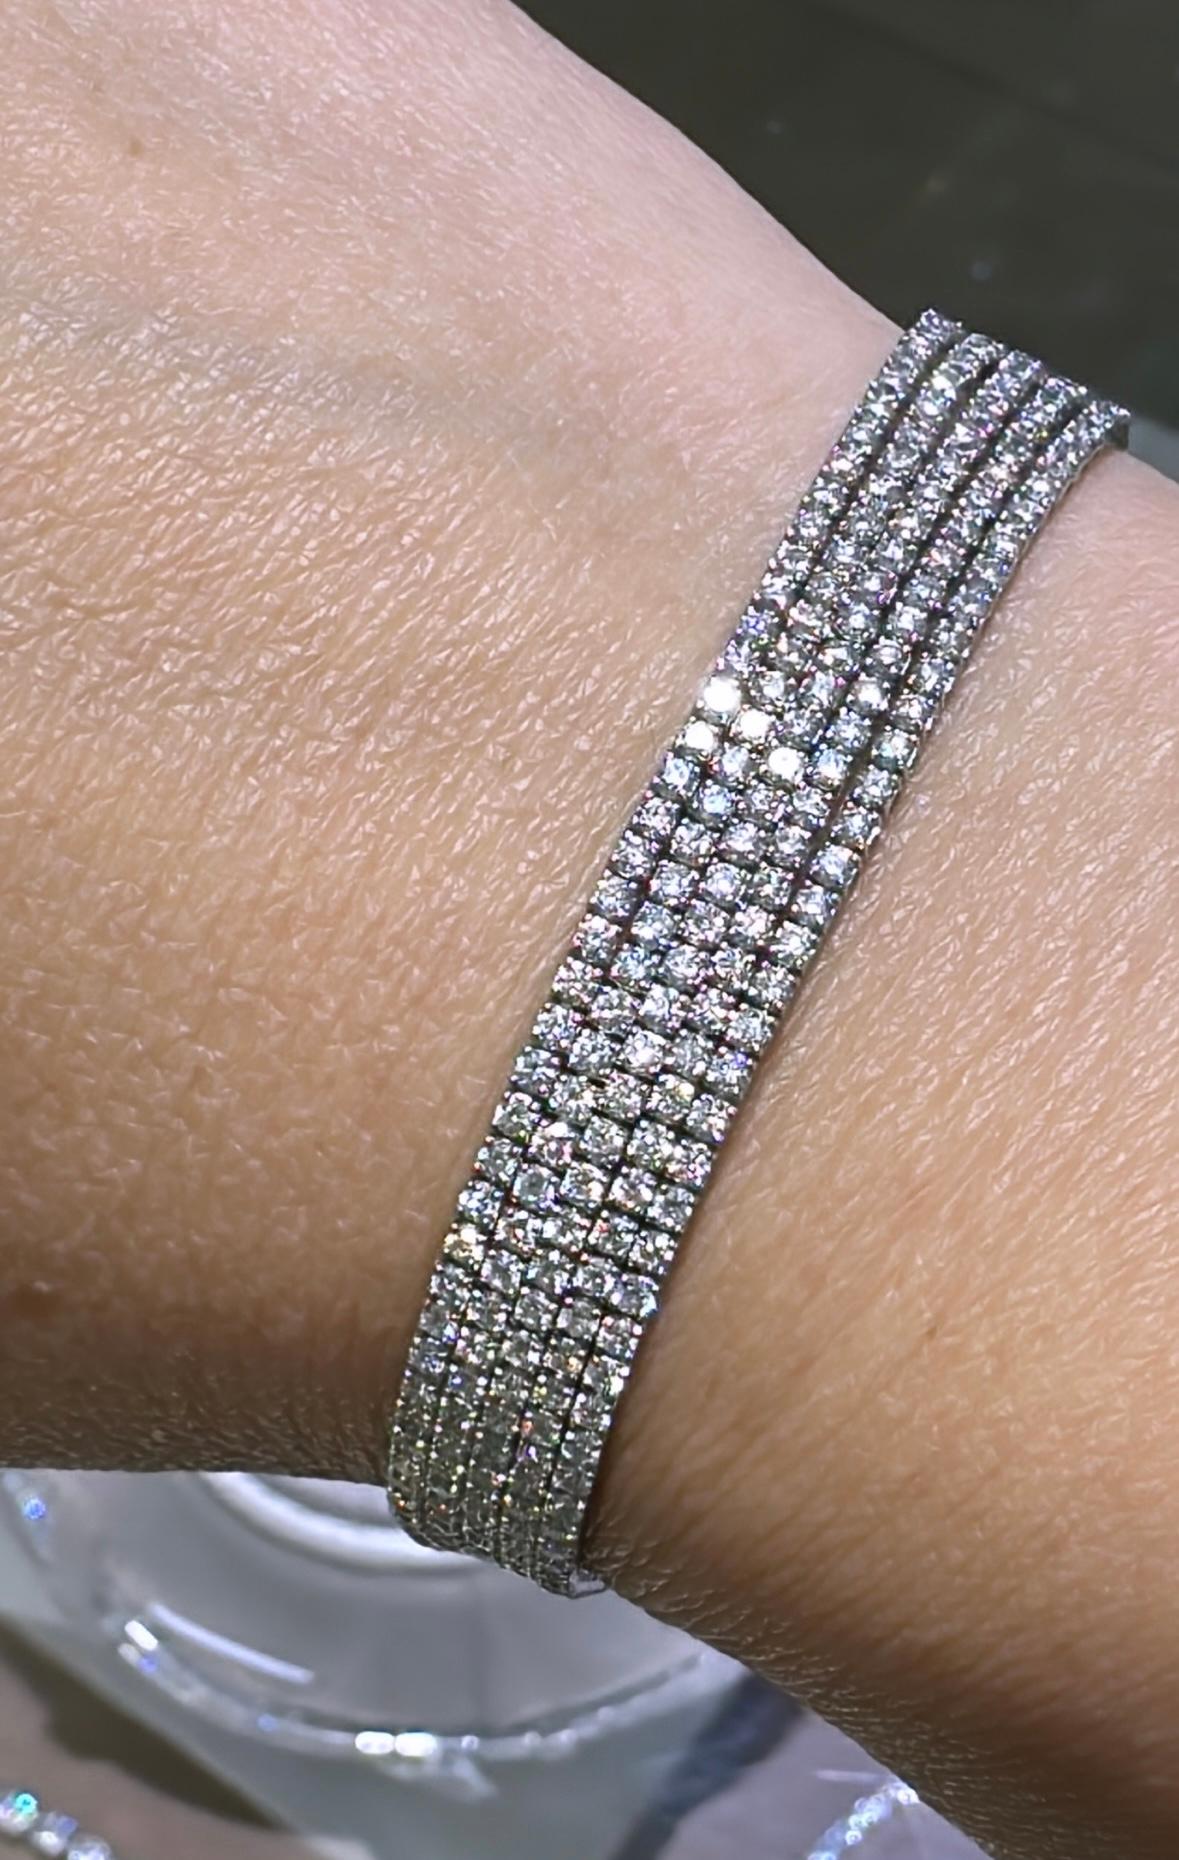 For those craving maximum sparkle, this indulgent tennis bracelet delivers. Five rows of sparkling diamonds clasp together for an ample layered look.
18K solid gold
532 near colorless diamonds
6.87carats
Box claps closure with safety latch
Length: 7